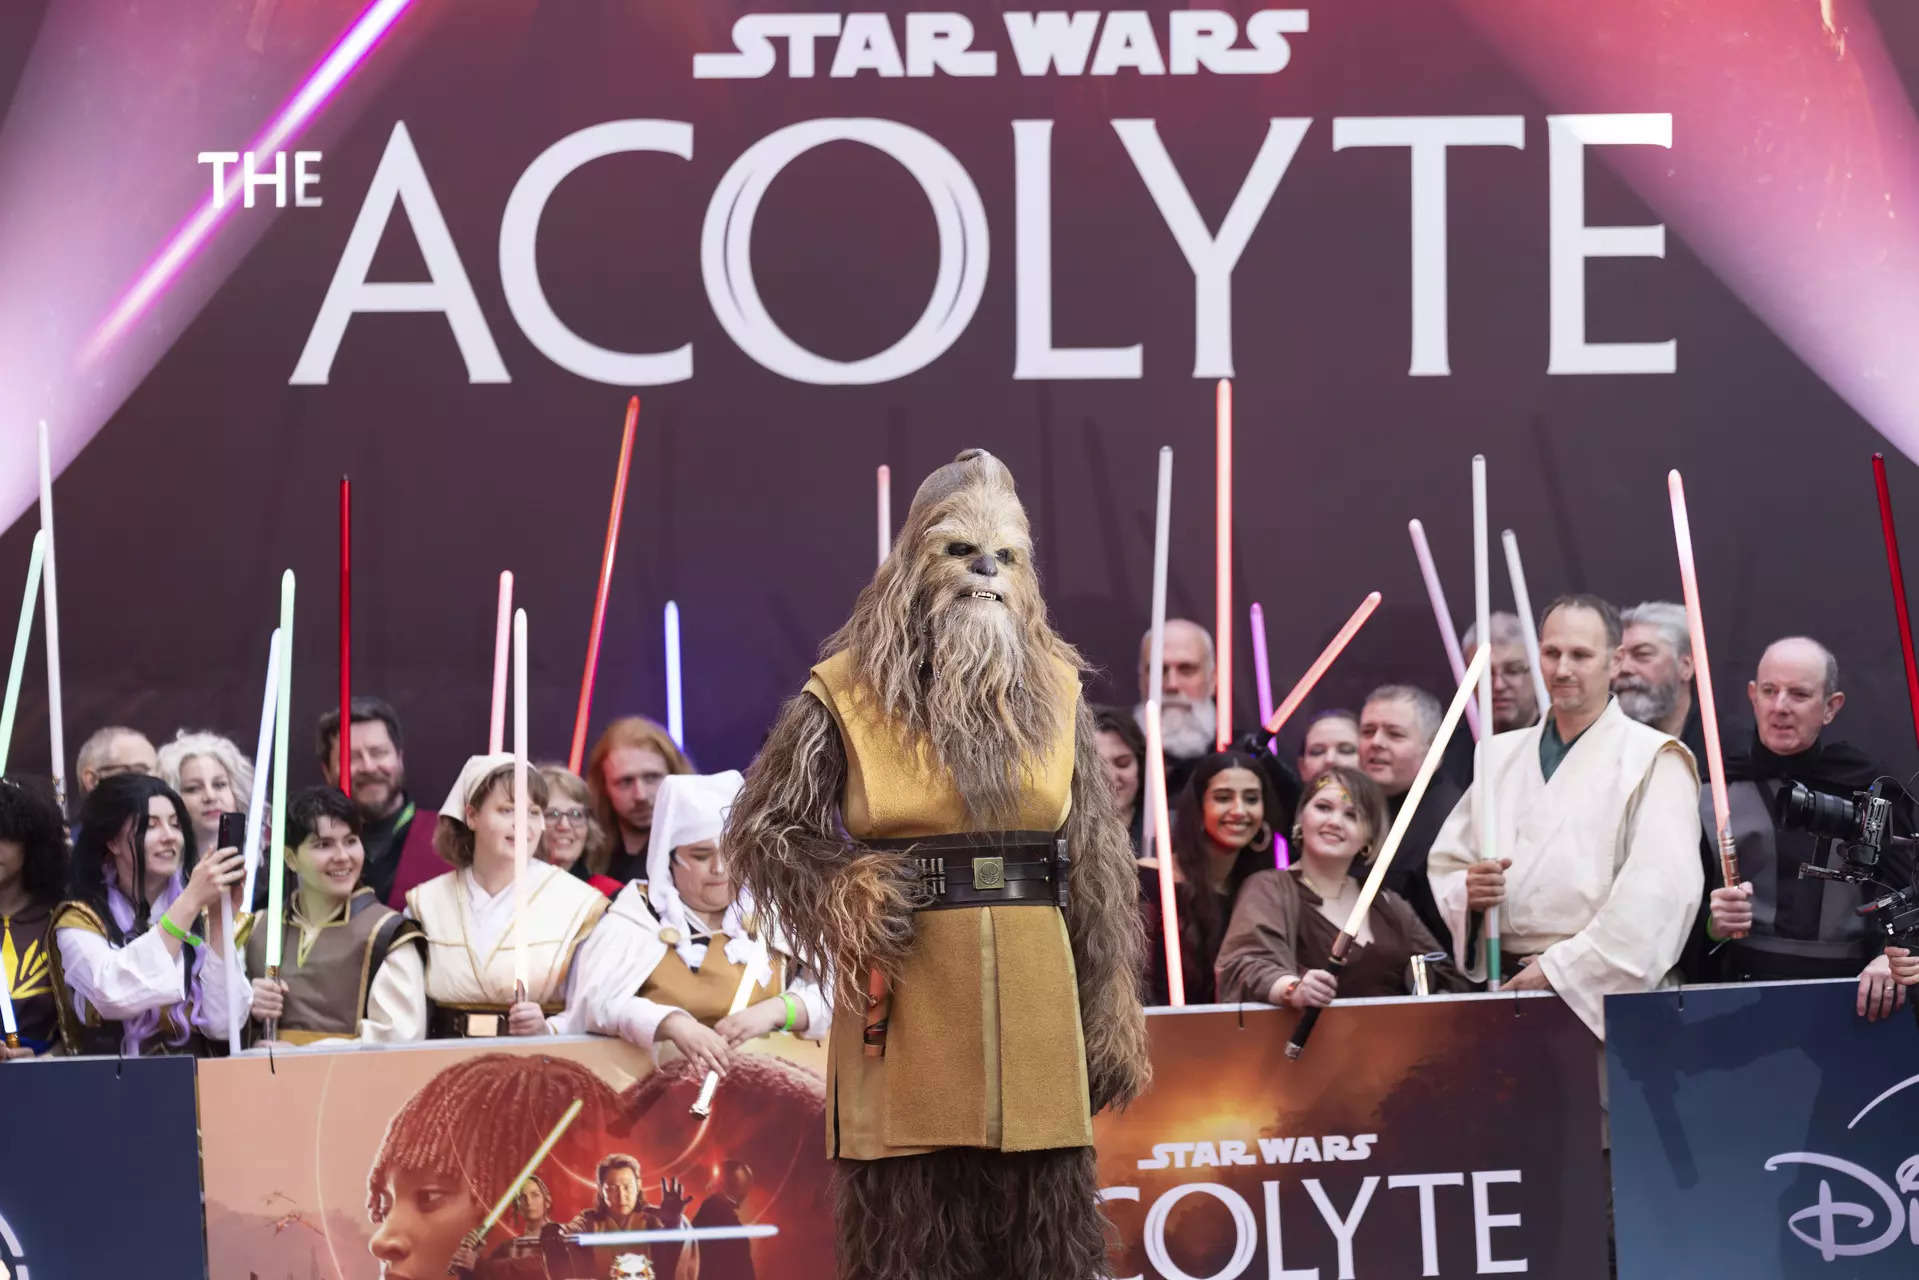 The Acolyte Season 2: Will Yoda appear in the second installment? 